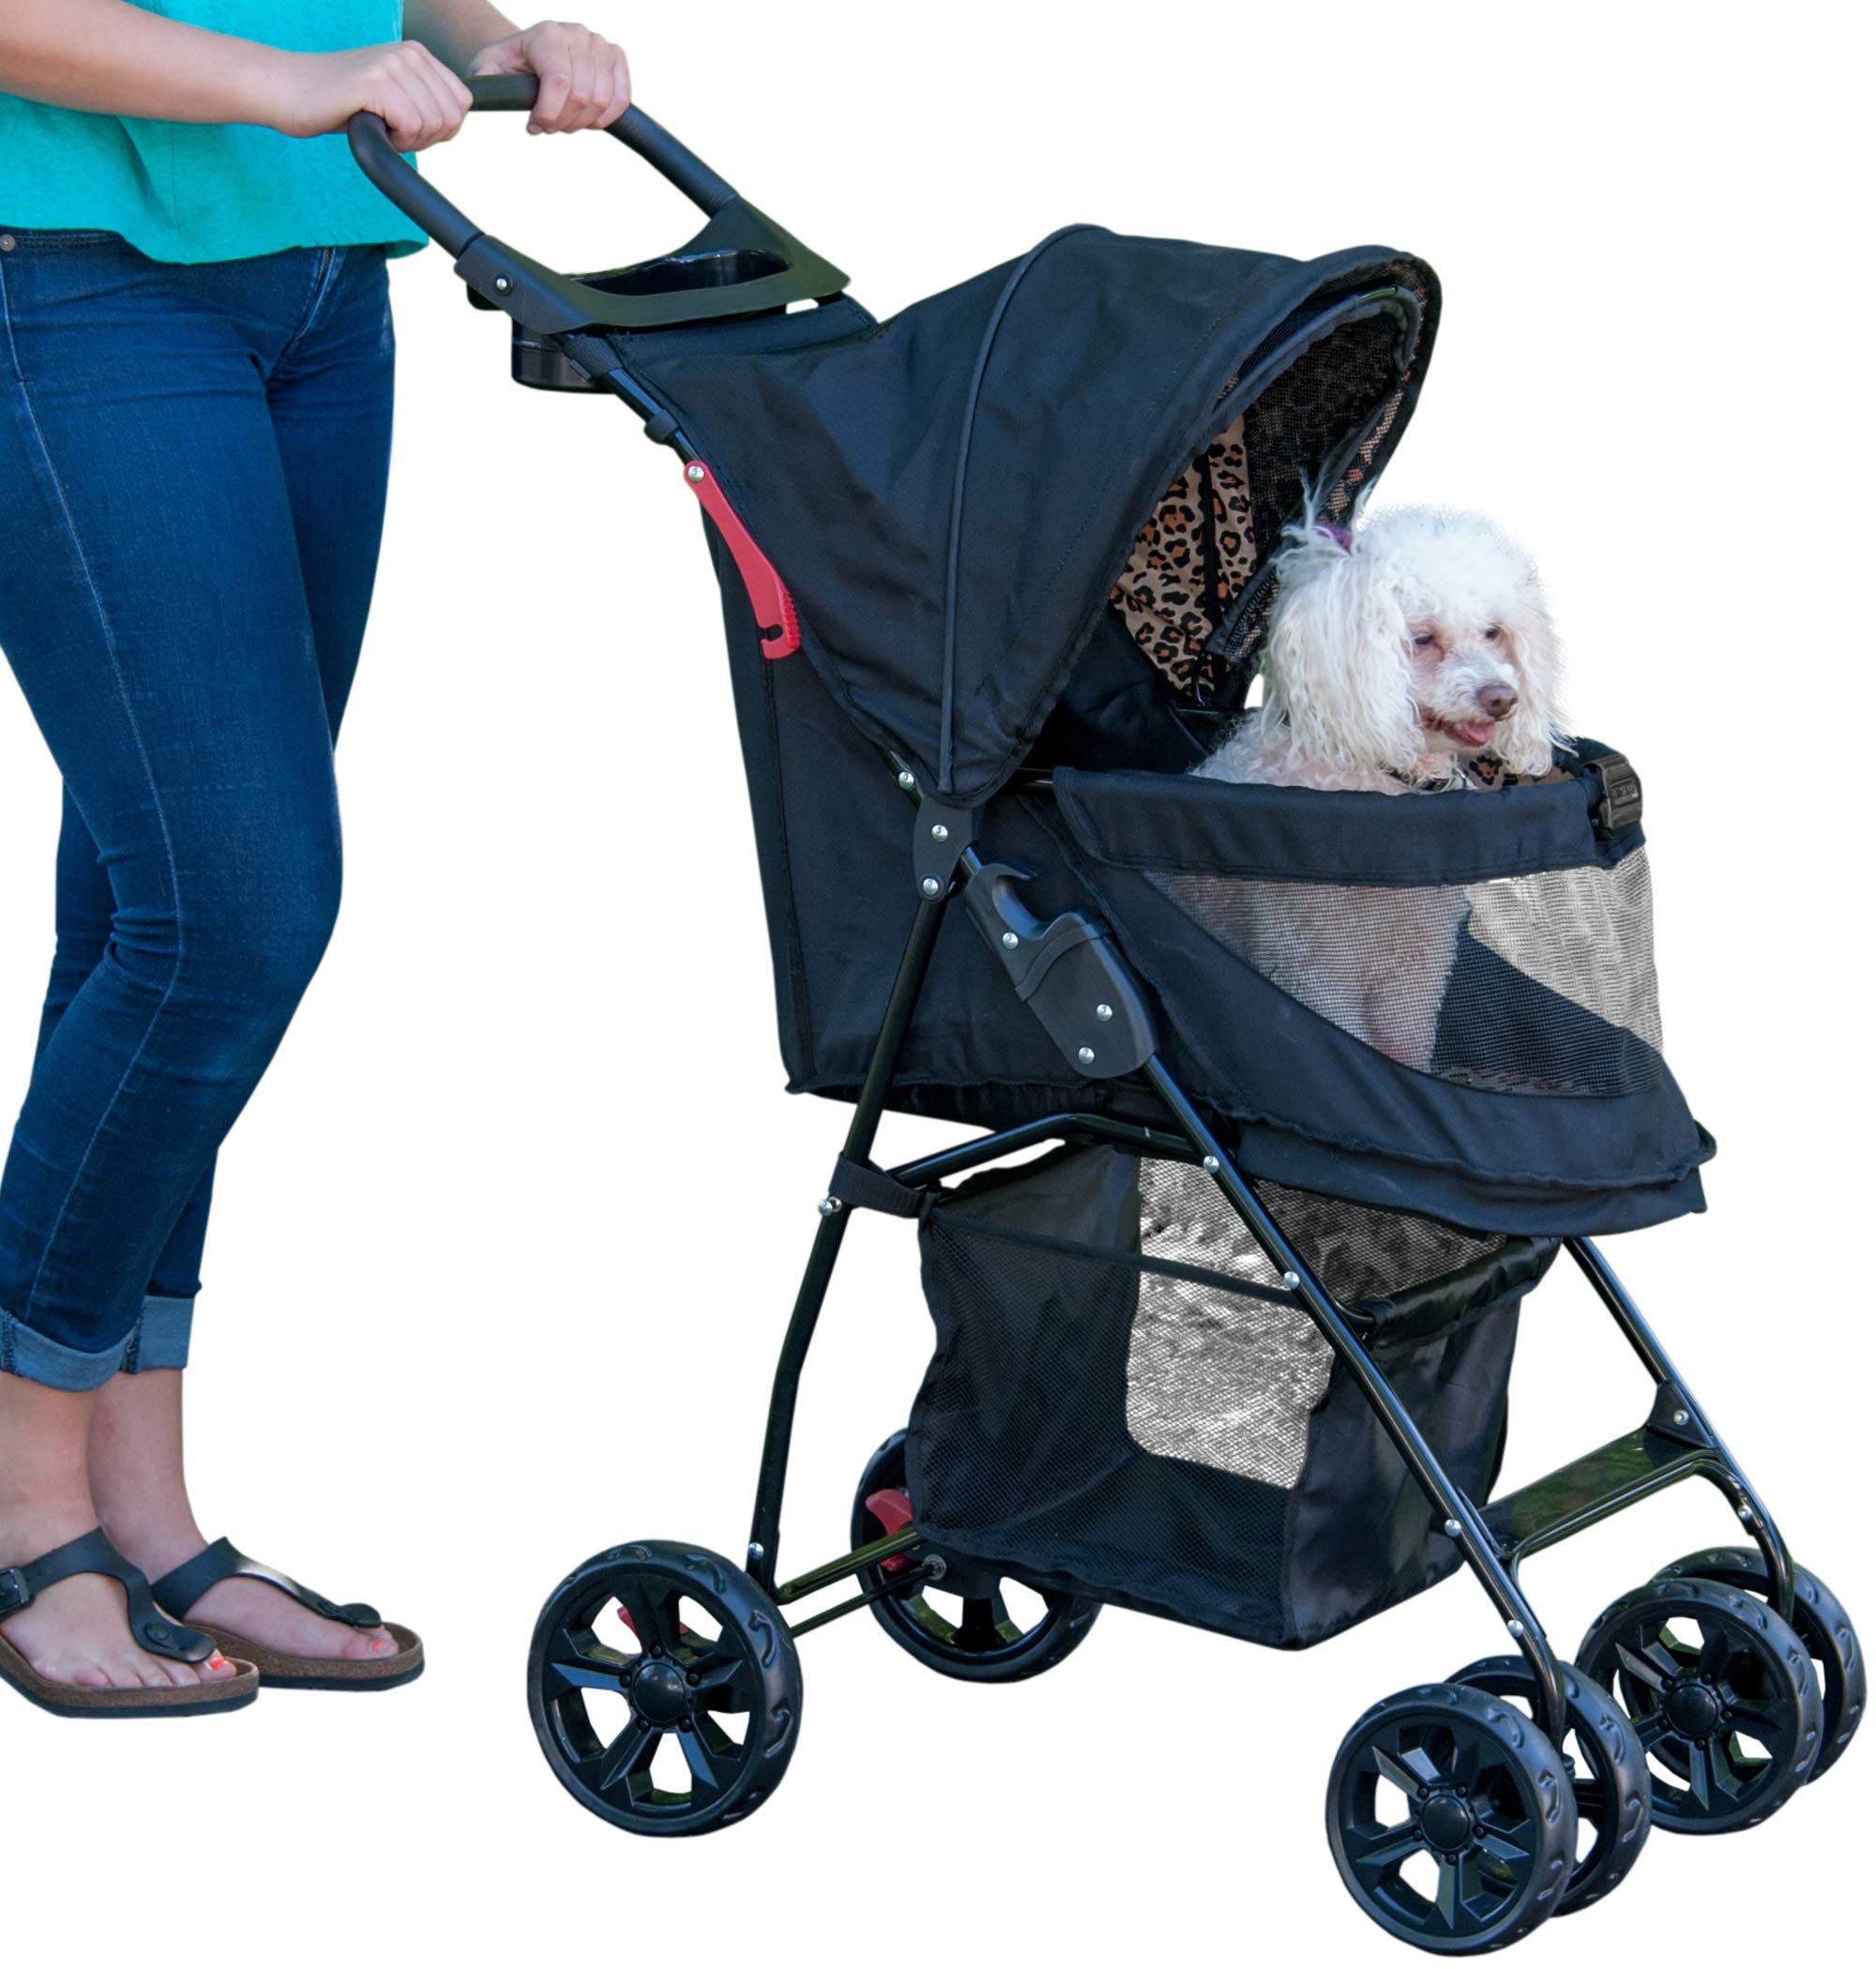 Pet Gear No-Zip Happy Trails Lite Pet Stroller for Cats/Dogs, Zipperless Entry, Easy Fold with Removable Liner, Safety Tether, Storage Basket + Cup Ho